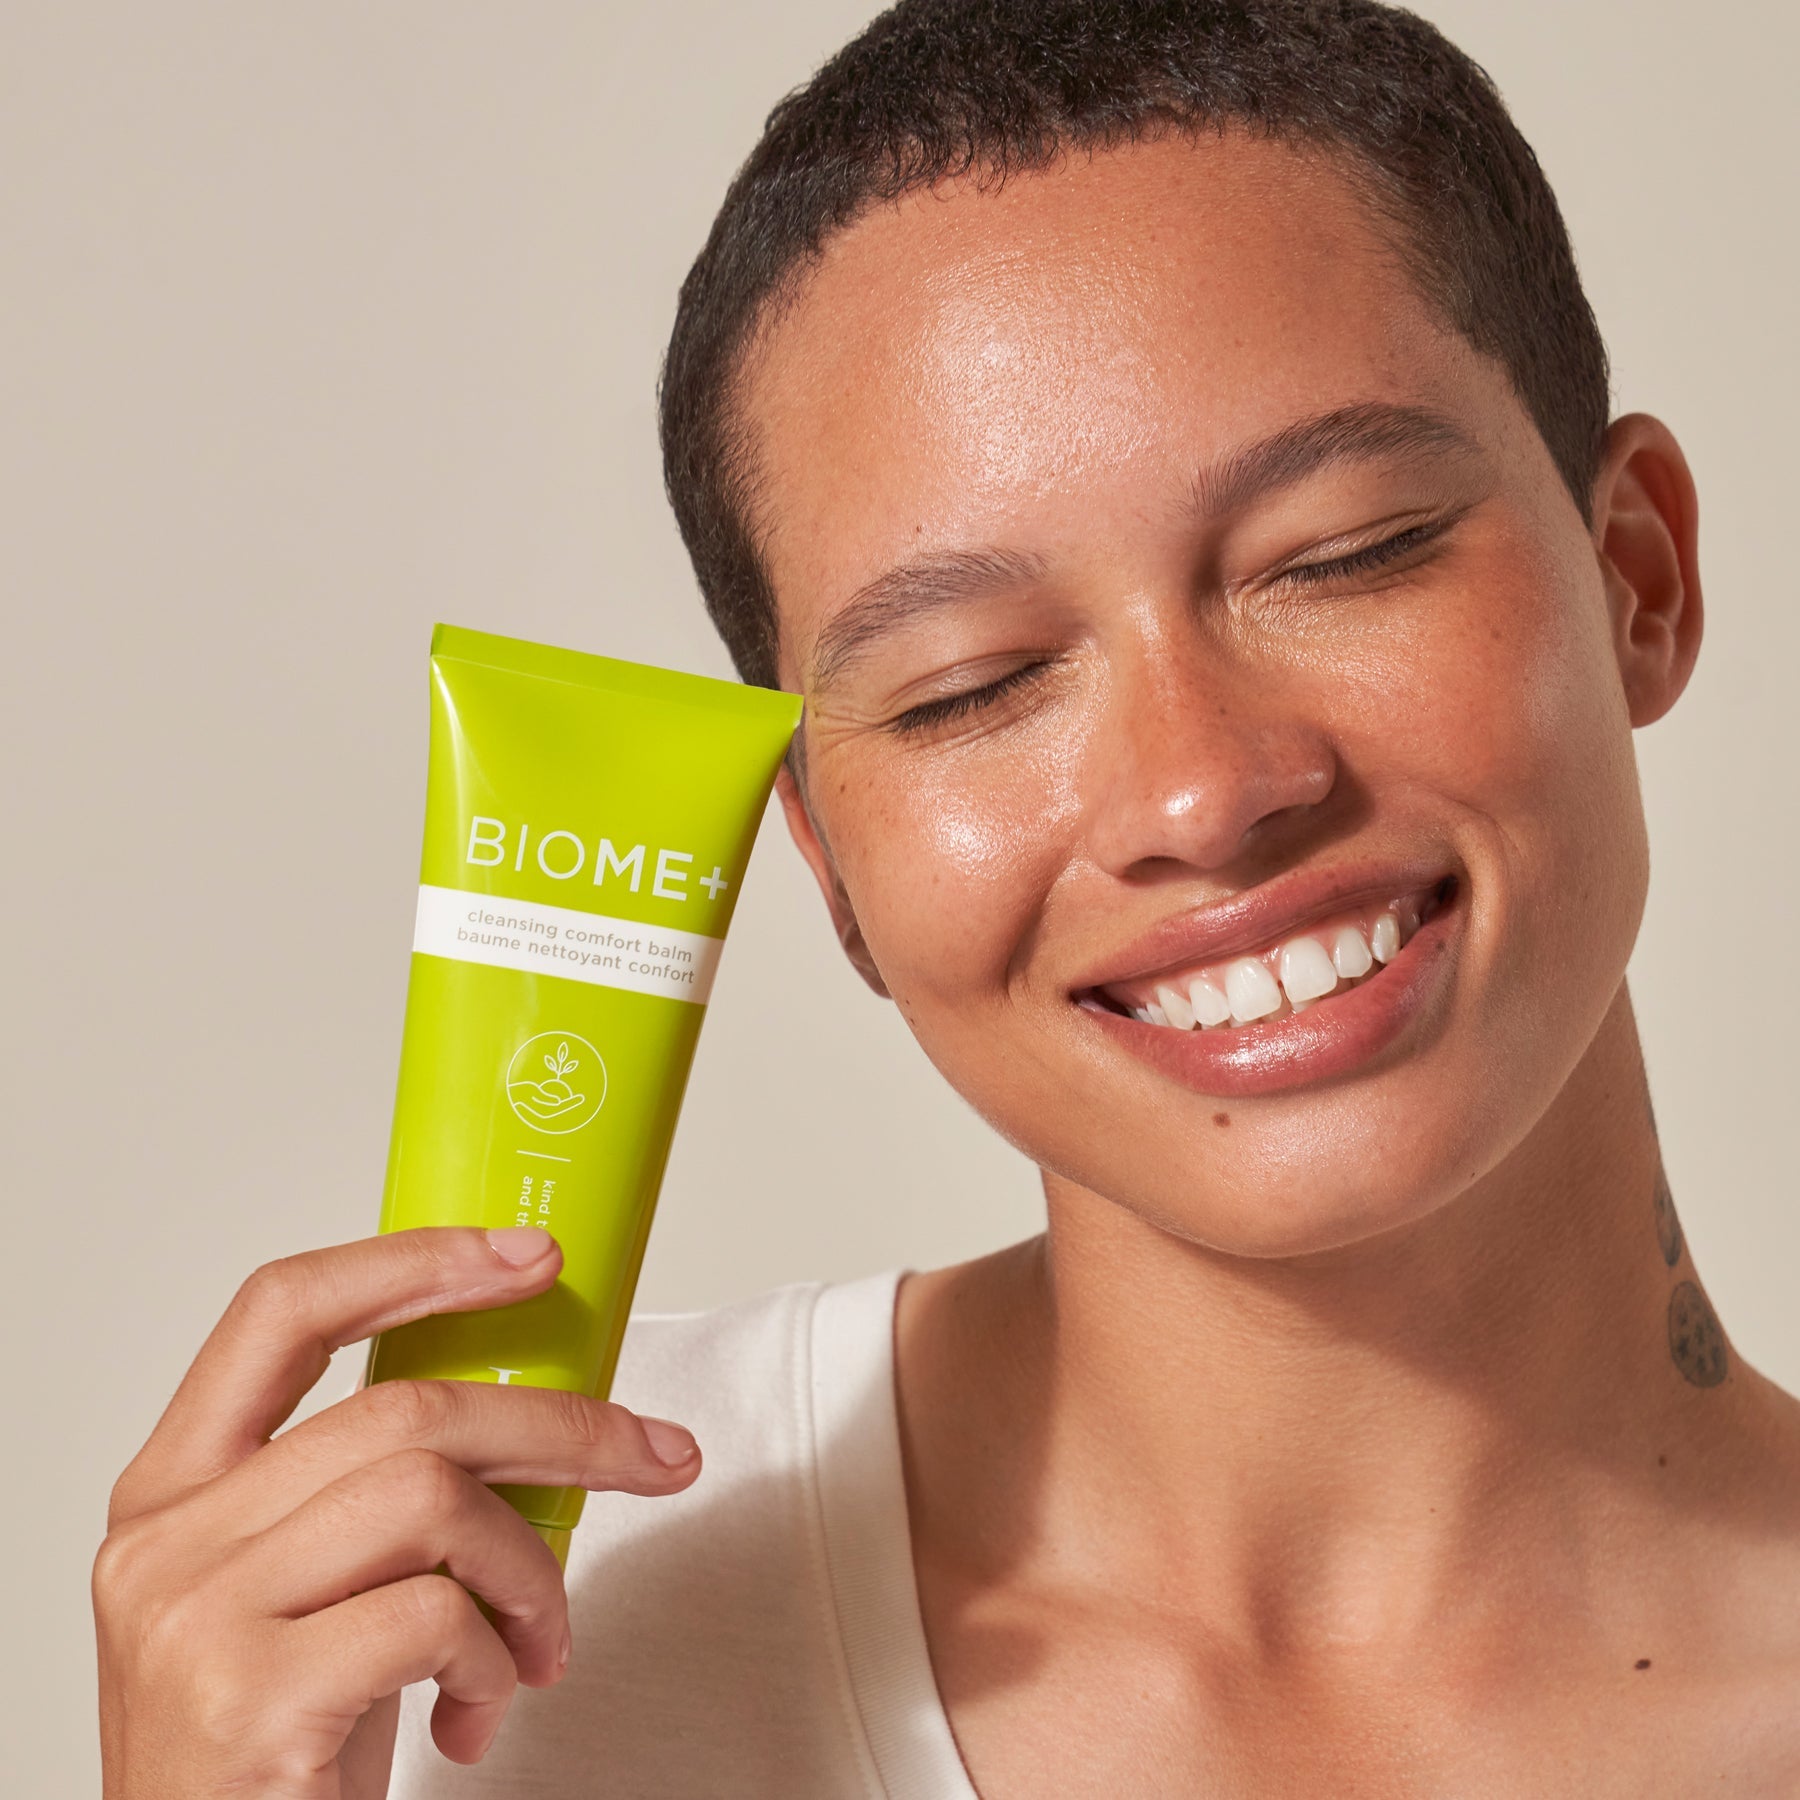 BIOME+™  cleansing comfort balm